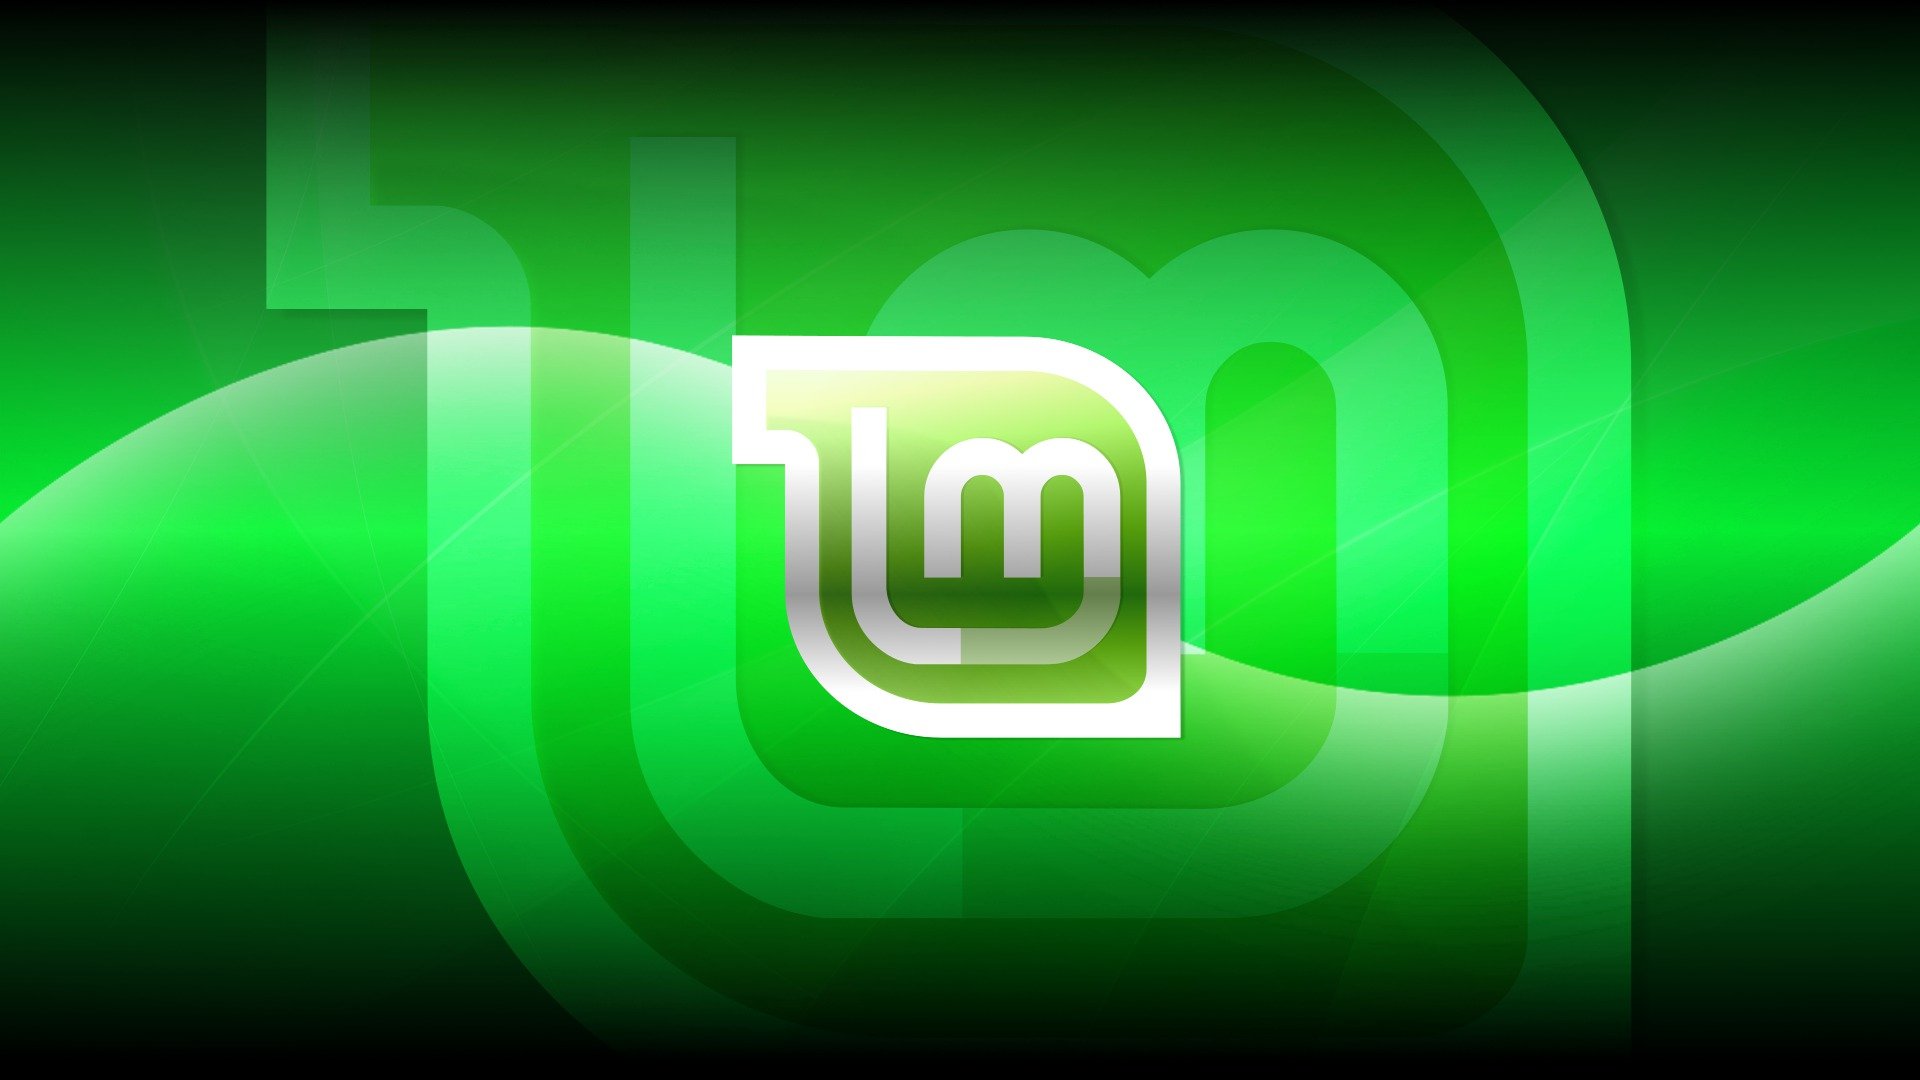 Green Background And Linux Mint Logo Hd Wallpaper - Linux Mint - HD Wallpaper 